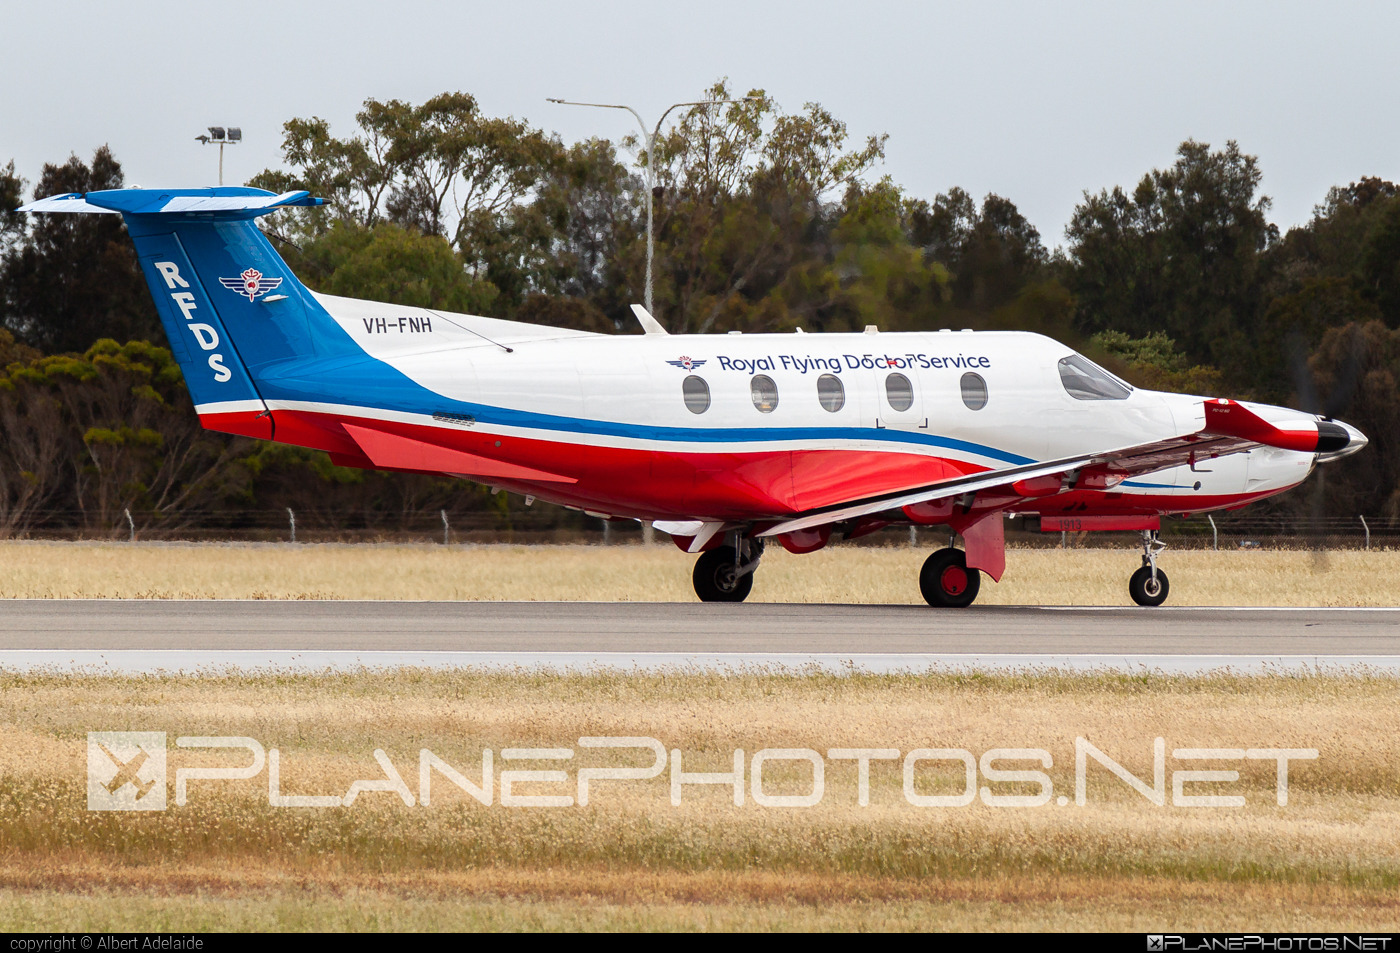 Pilatus PC-12/47E - VH-FNH operated by Royal Flying Doctor Service of Australia #pc12 #pc1247e #pc12ng #pilatus #pilatuspc12 #pilatuspc12ng #royalFlyingDoctorService #royalFlyingDoctorServiceOfAustralia